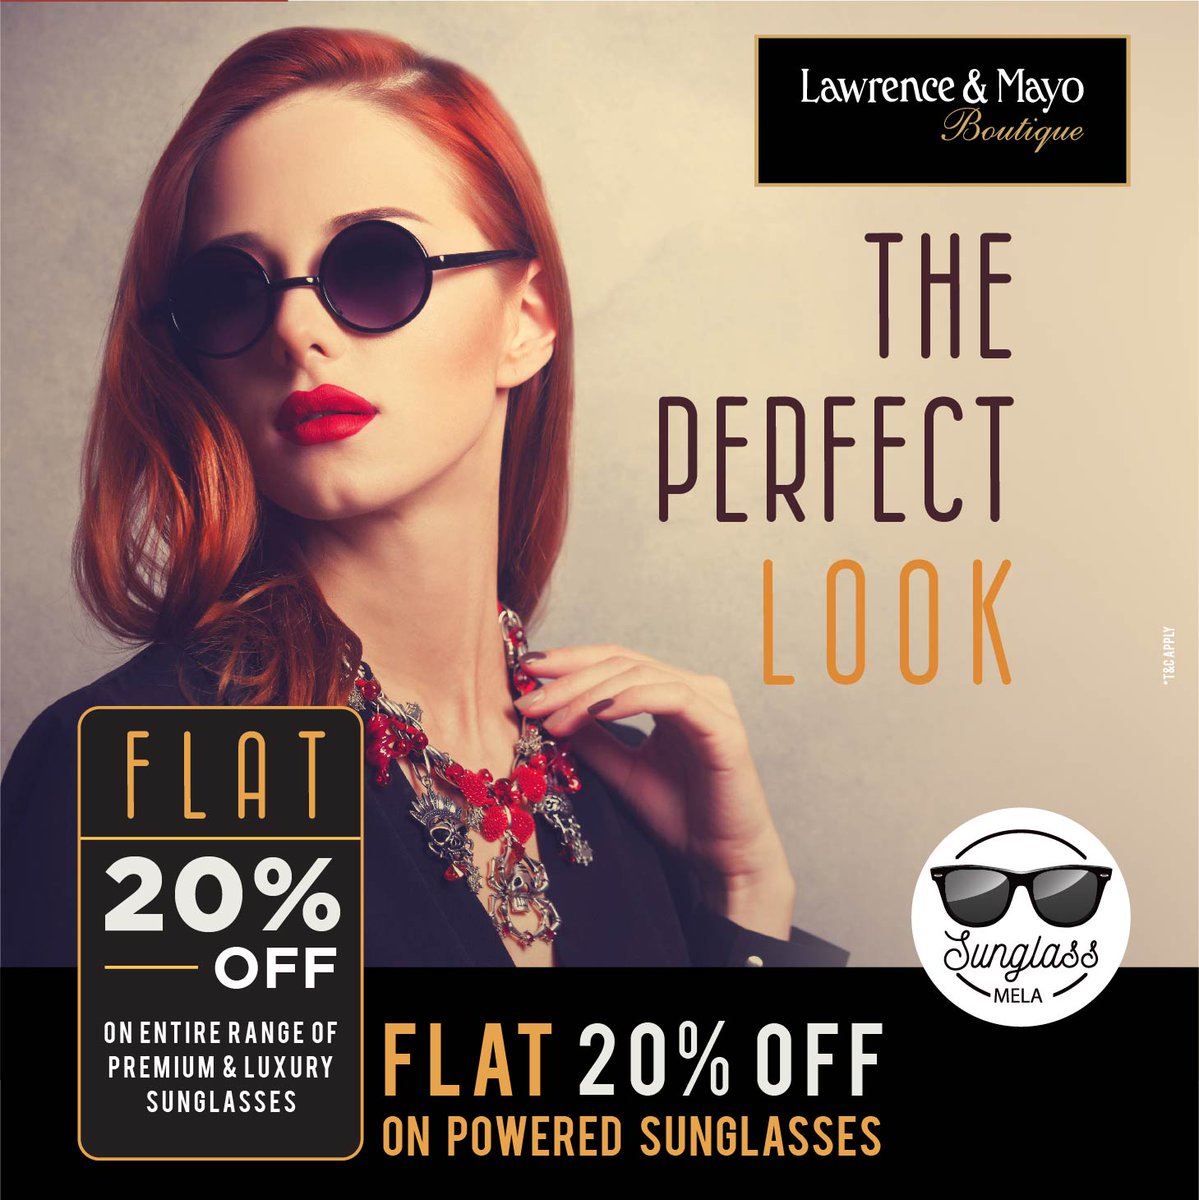 The greatest Sunglasses Sale of the year is here - The Sunglass Mela 2019! We are extremely excited to bring an offer that is bound to bring a smile. A Flat 20%Off on the entire range at the #LawrenceandMayoBoutique. #BrandedSunglasses #Sunglasses #Offer #SGM2019 #luxurylifestyle